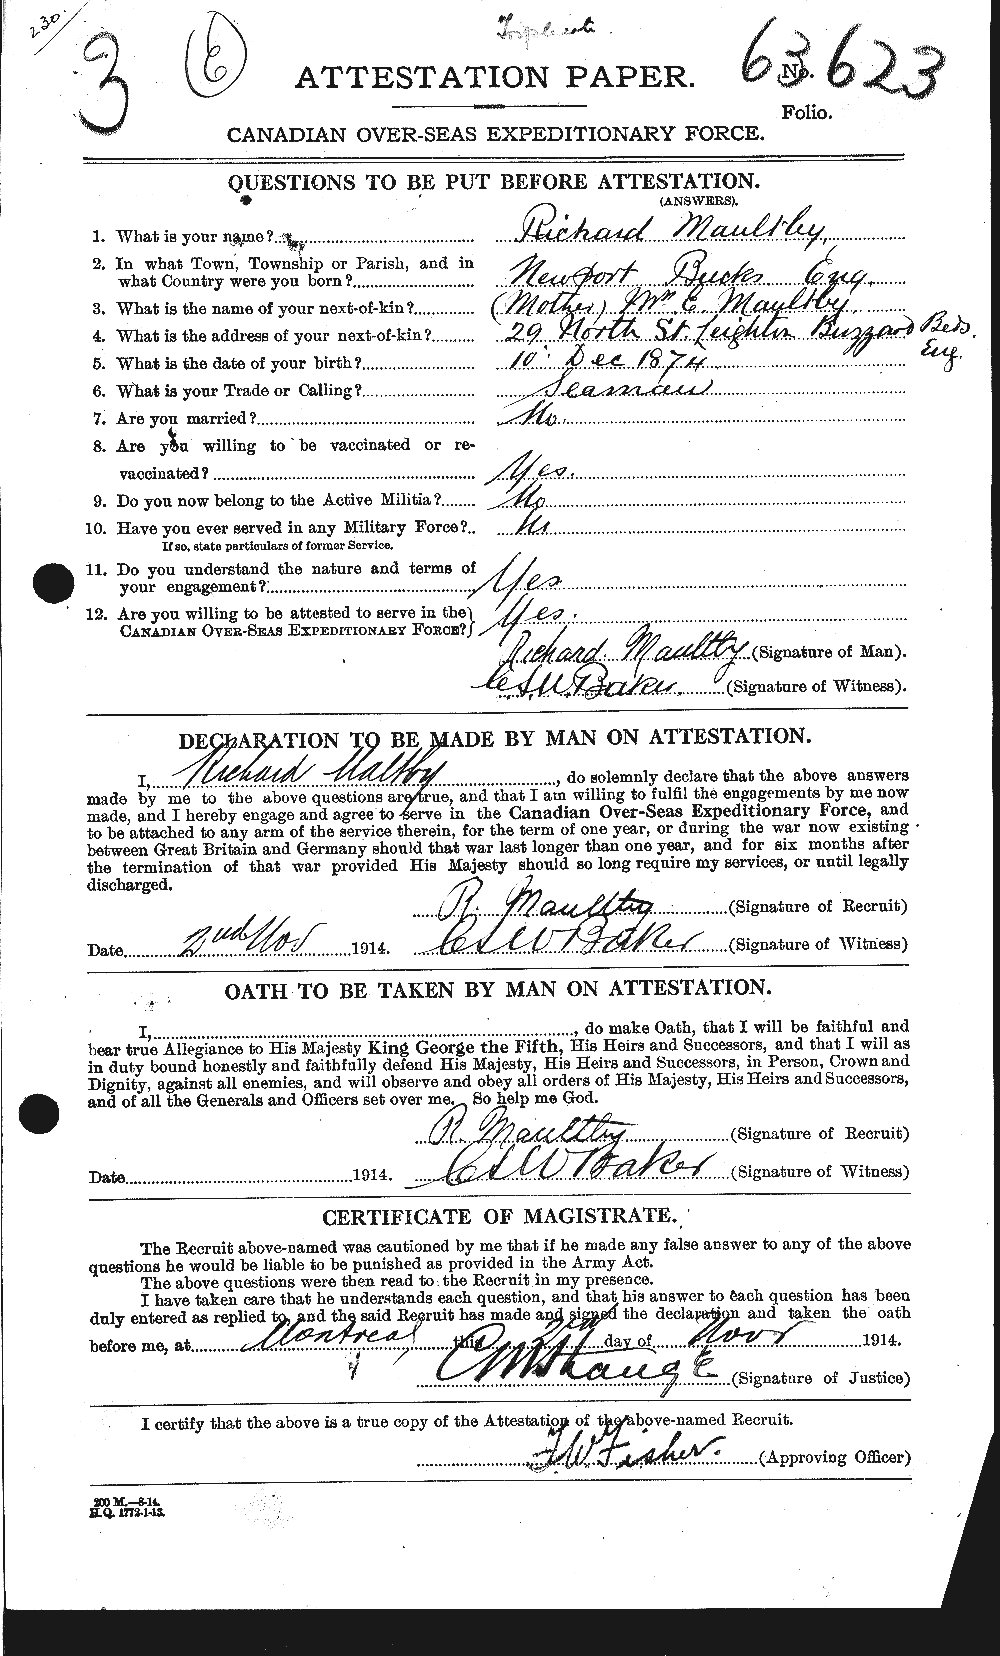 Personnel Records of the First World War - CEF 487787a